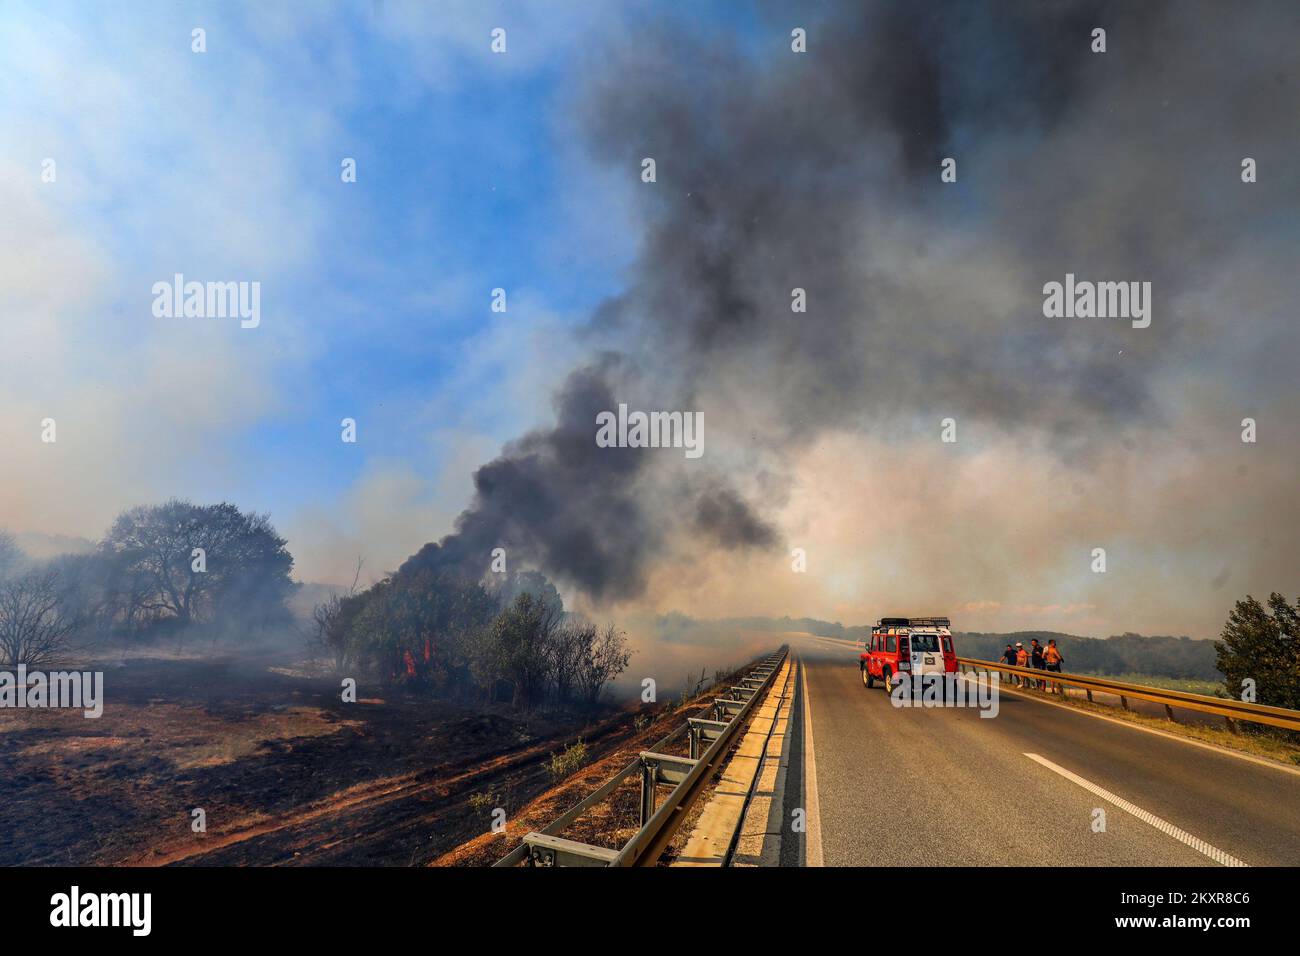 August 12, 2021, Pula - A fire broke out in the wider vicinity of Pula, more precisely between Sikici and Skatari, which was successfully extinguished with the help of firefighters from Pula, Medulin, Fazana, Galizana and other DVDs, and finally Canadians. Photo: Srecko Niketic/PIXSELL  Stock Photo